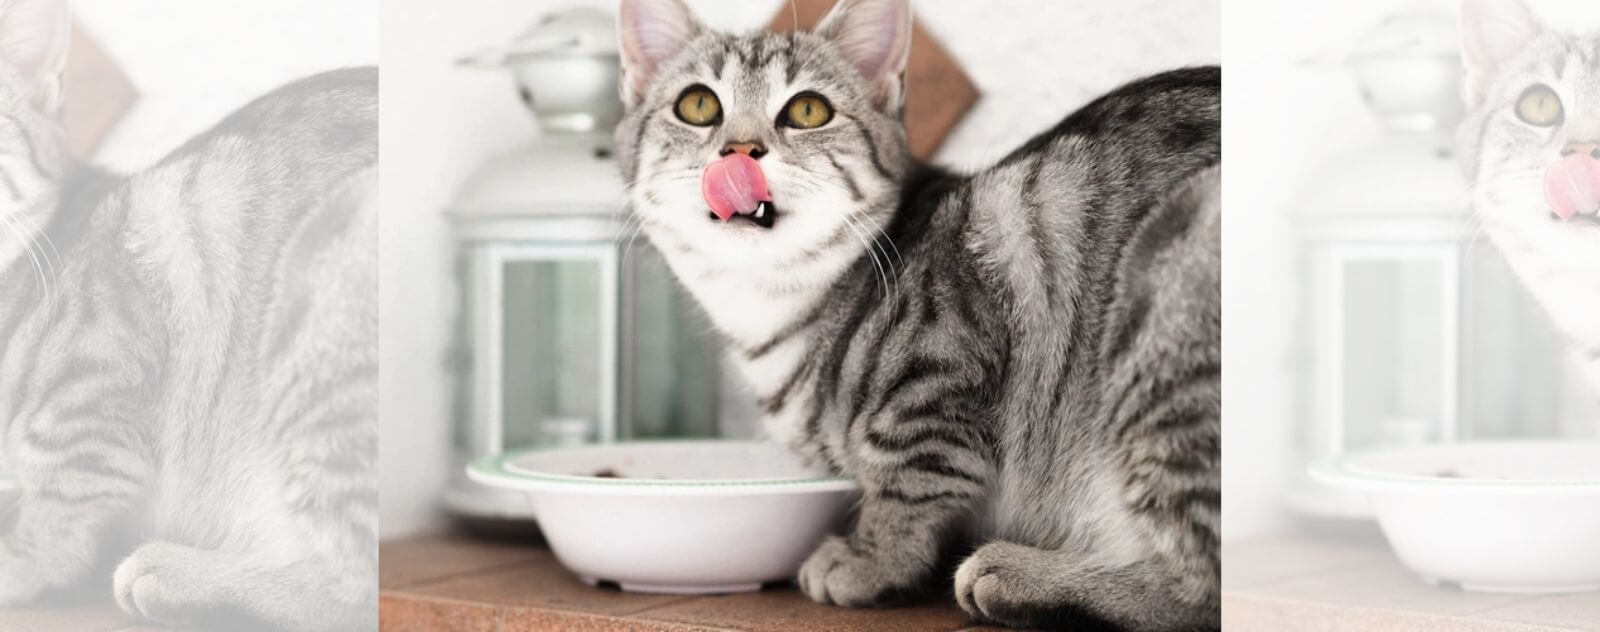 Gray Tabby Cat Eating and Drinking a Bowl of Milk